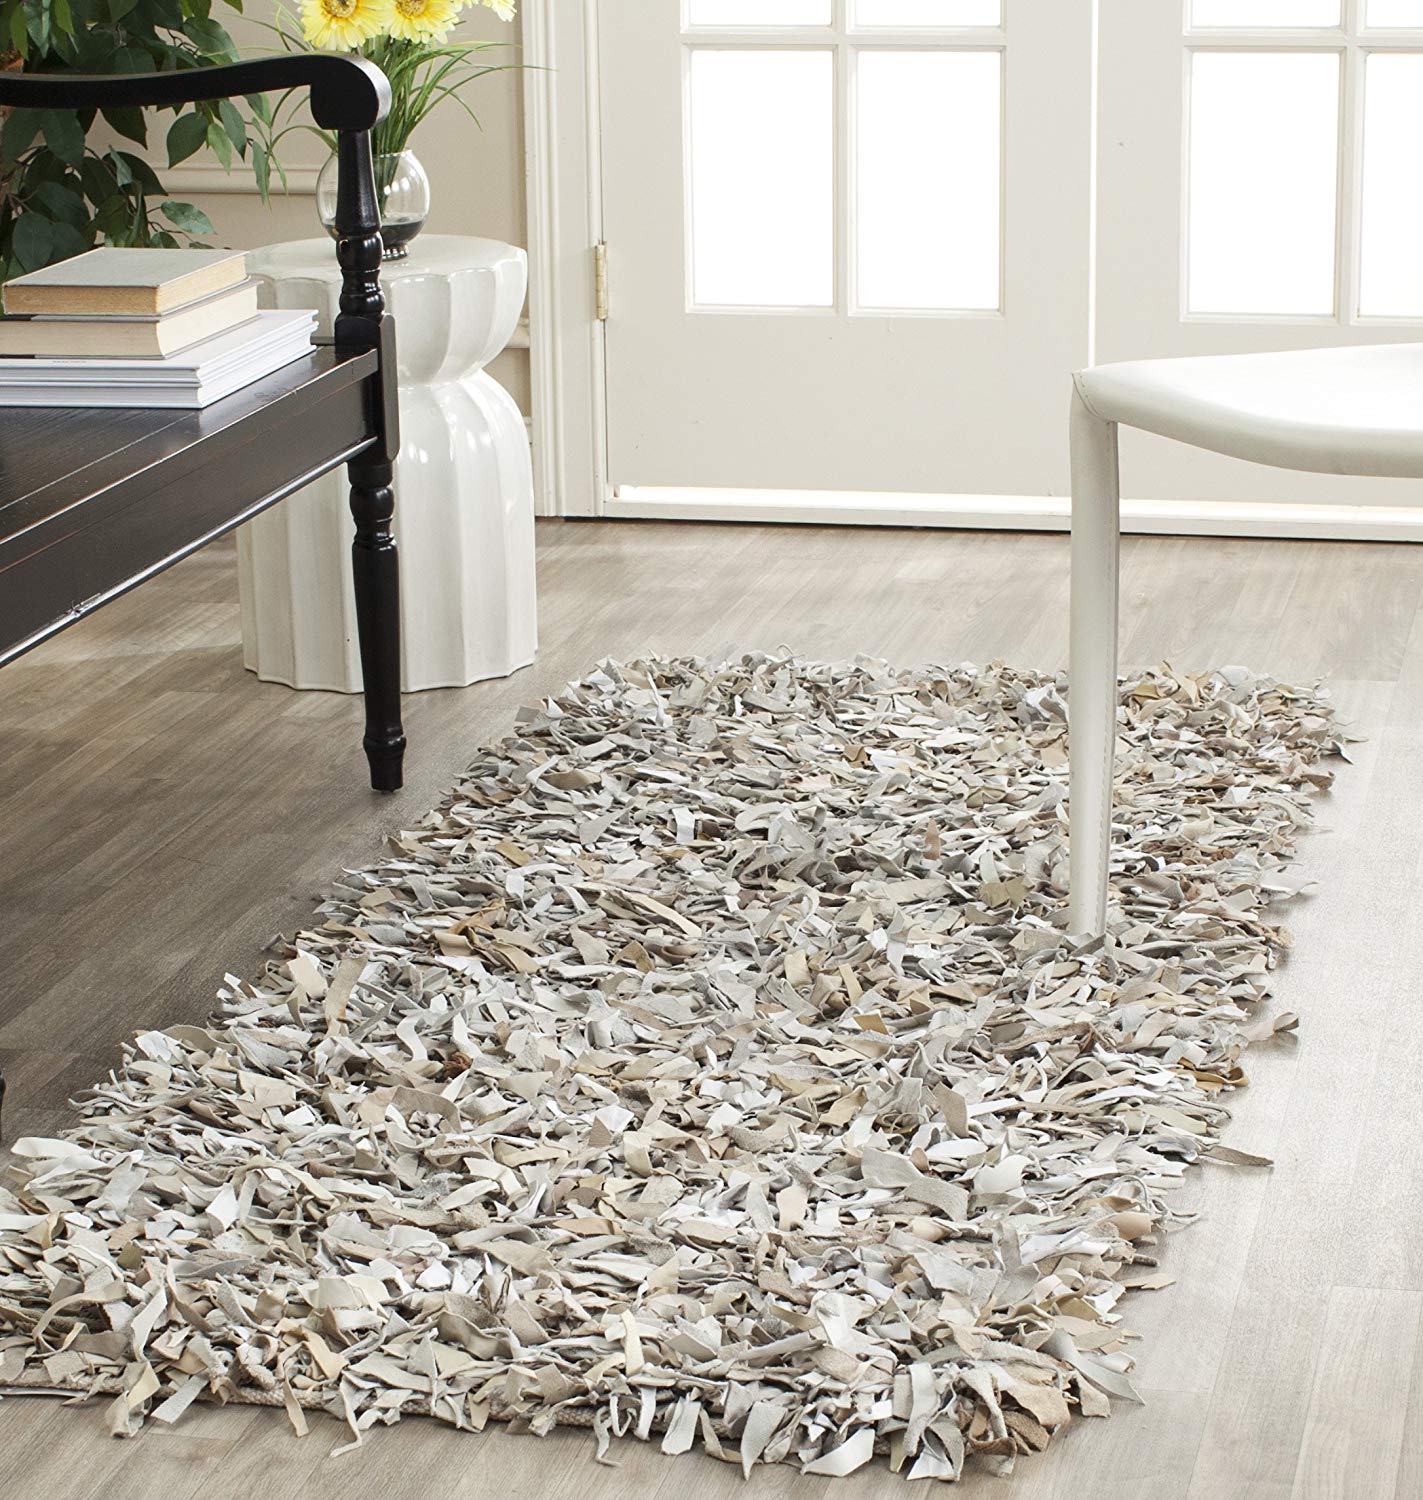 Leather shag rugs amazon.com: safavieh leather shag collection lsg511c hand woven white  leather runner (2u00273 CZYSUIY